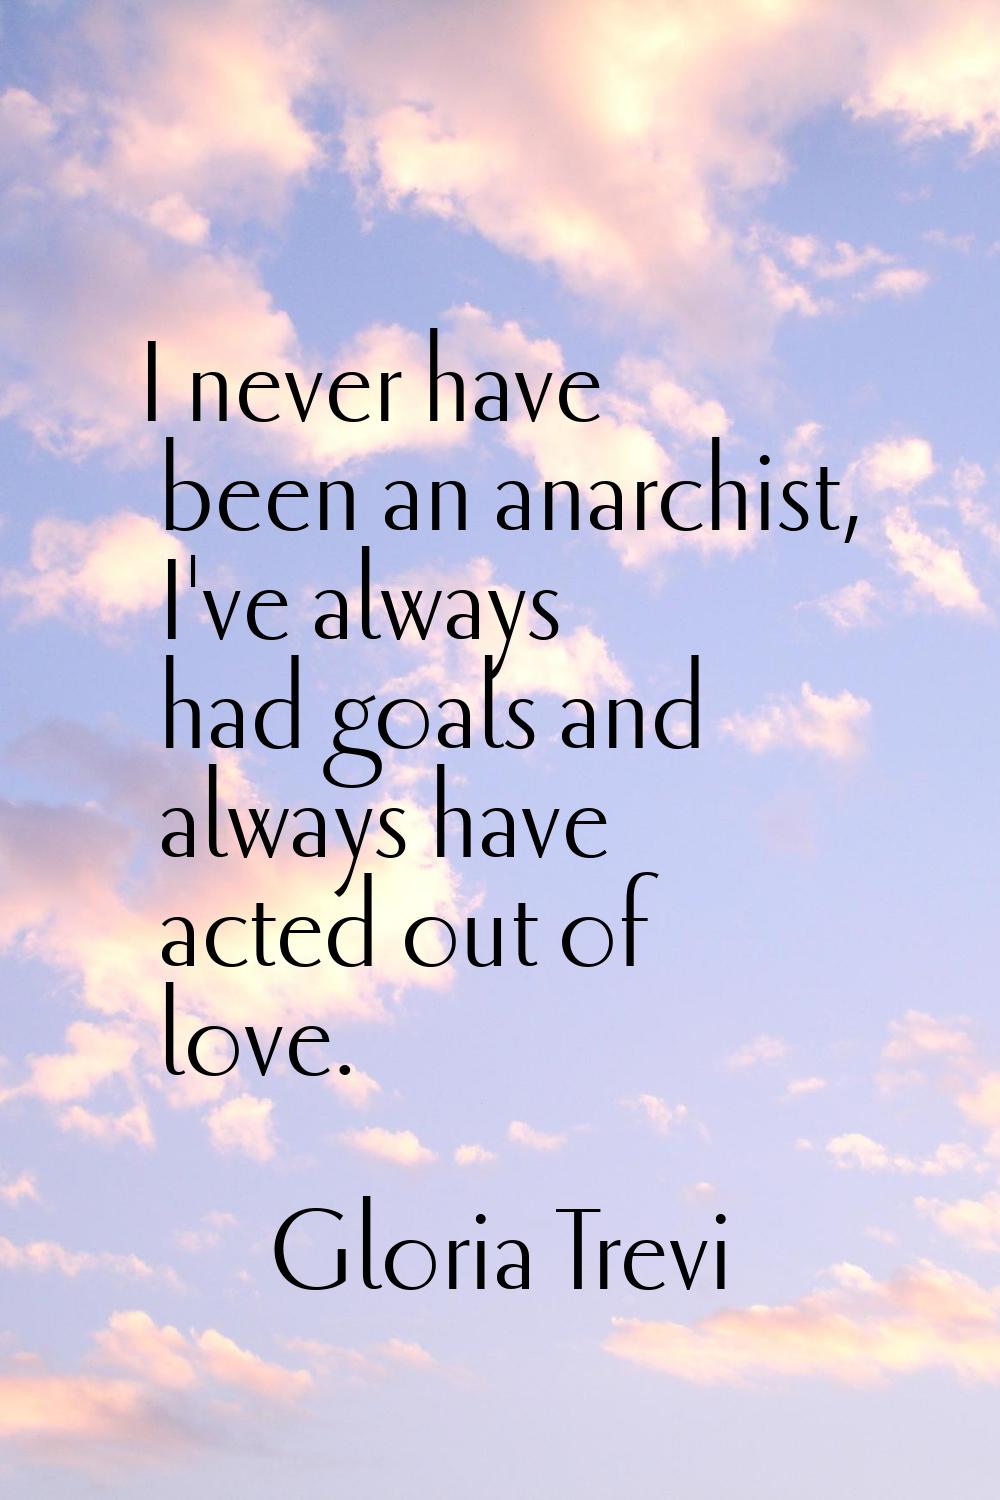 I never have been an anarchist, I've always had goals and always have acted out of love.